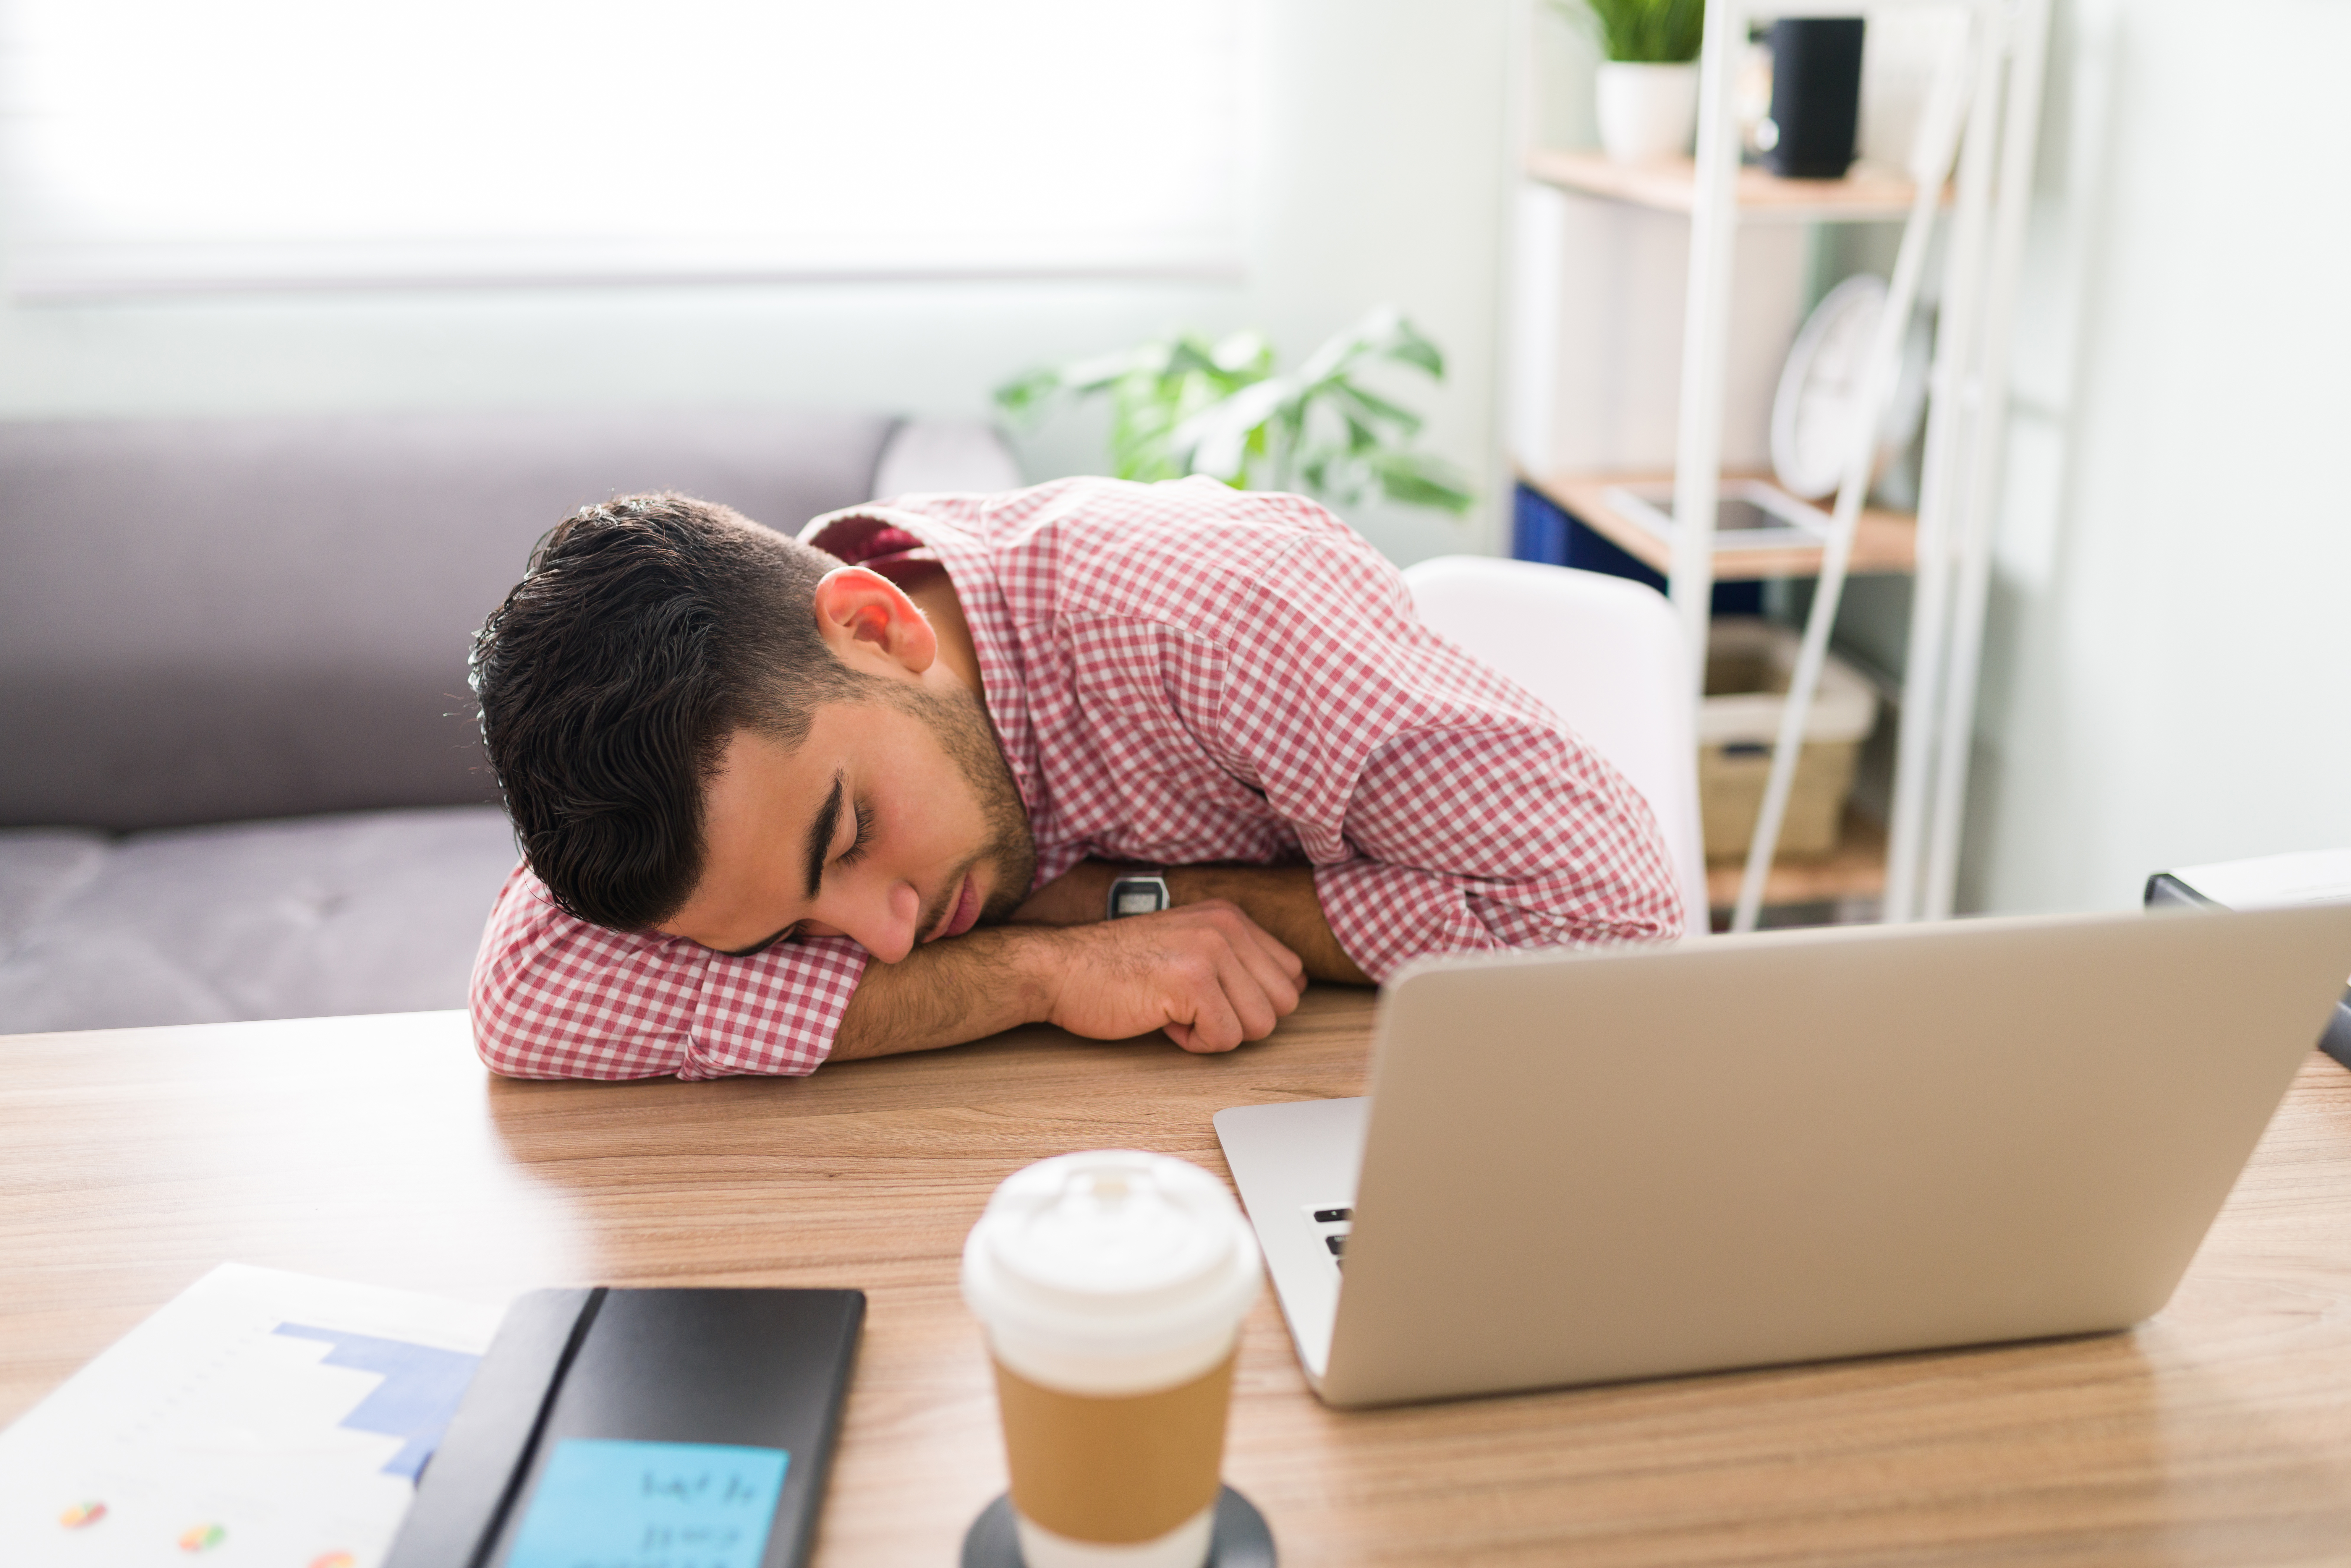 Accountant suffering from burnout